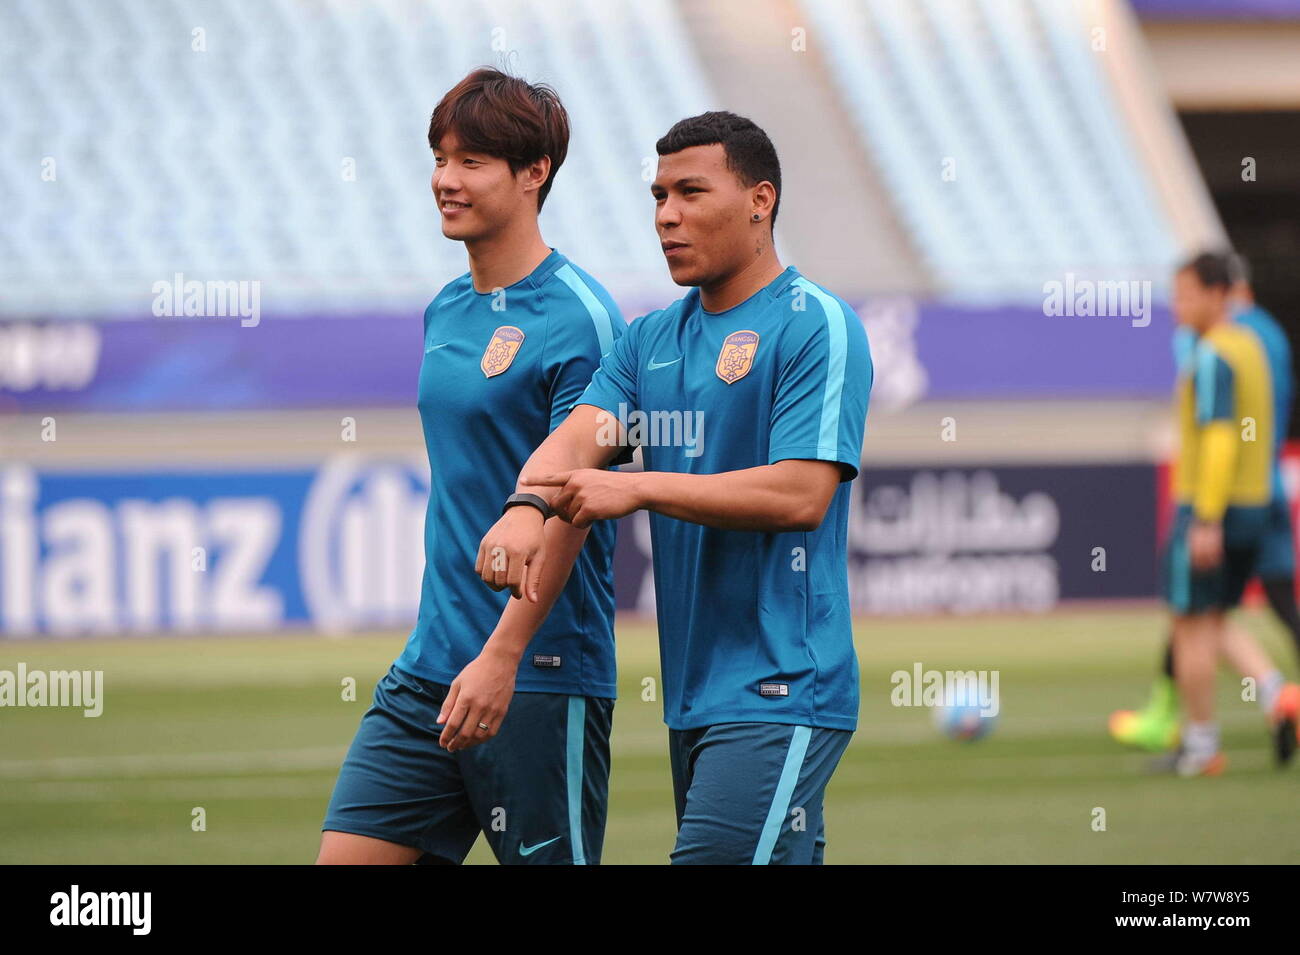 South Korean soccer player Hong Jeong-ho, left, and Colombian soccer player Roger Martinez, of China's Jiangsu Suning take part in a training session Stock Photo